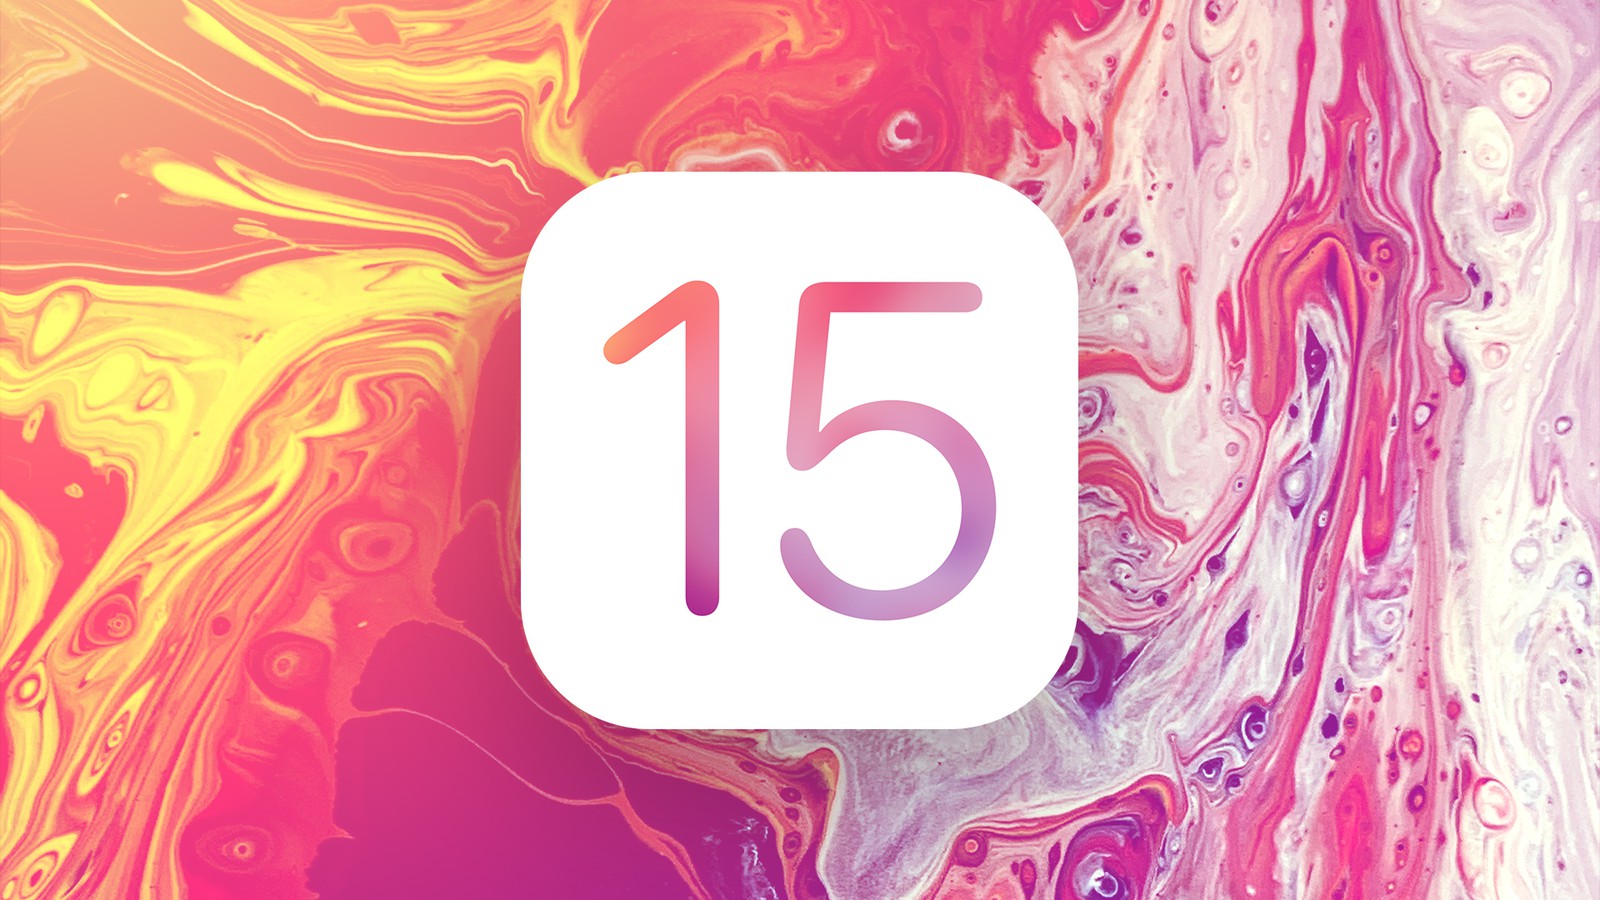 Looking for this iOS 15 wallpaper